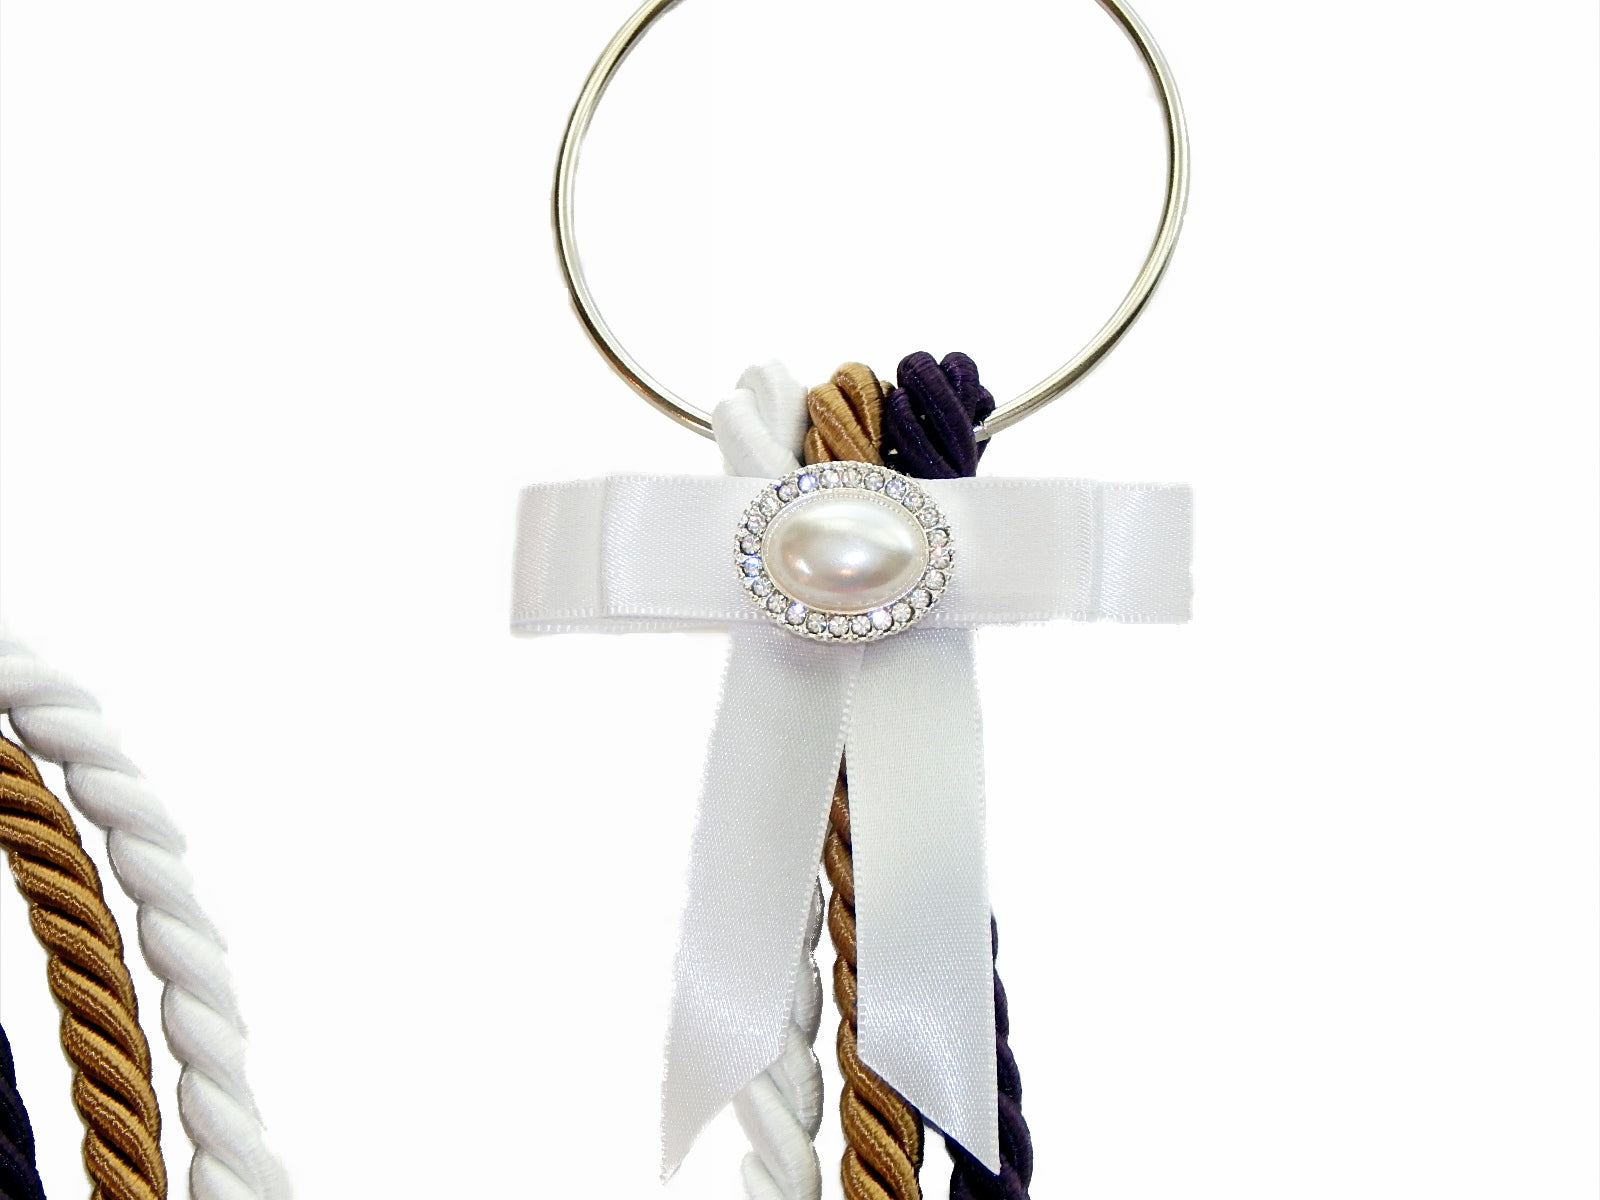 Unity Braids® A Cord Of Three Strands Wedding Gift Ideas for The Couple - Unity Braids